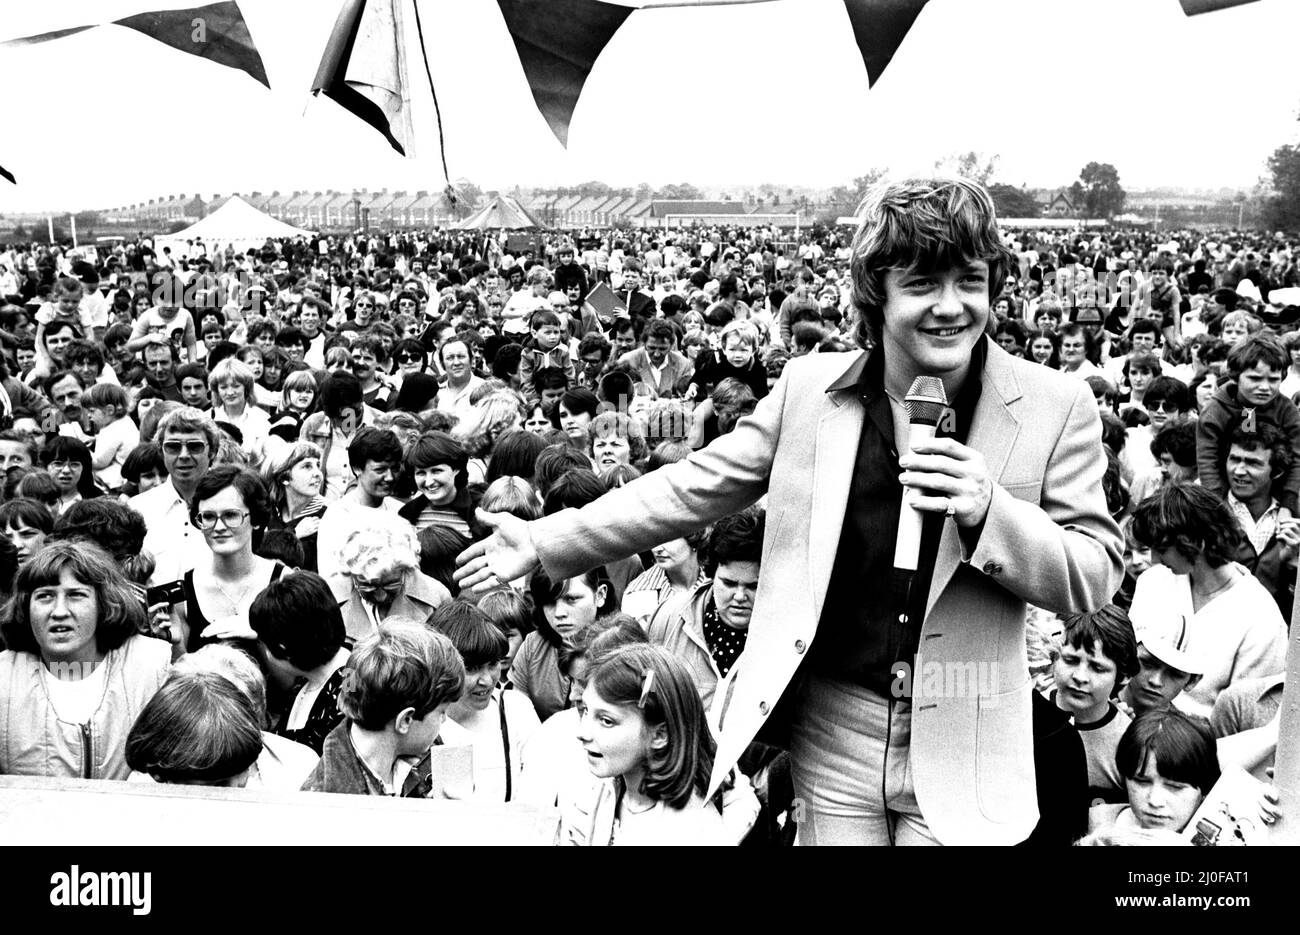 Swap-shop star Keith Chegwin entertained the crowd at the YMCA gala event at Herrington Park in Sunderland 7 June 1980 Stock Photo